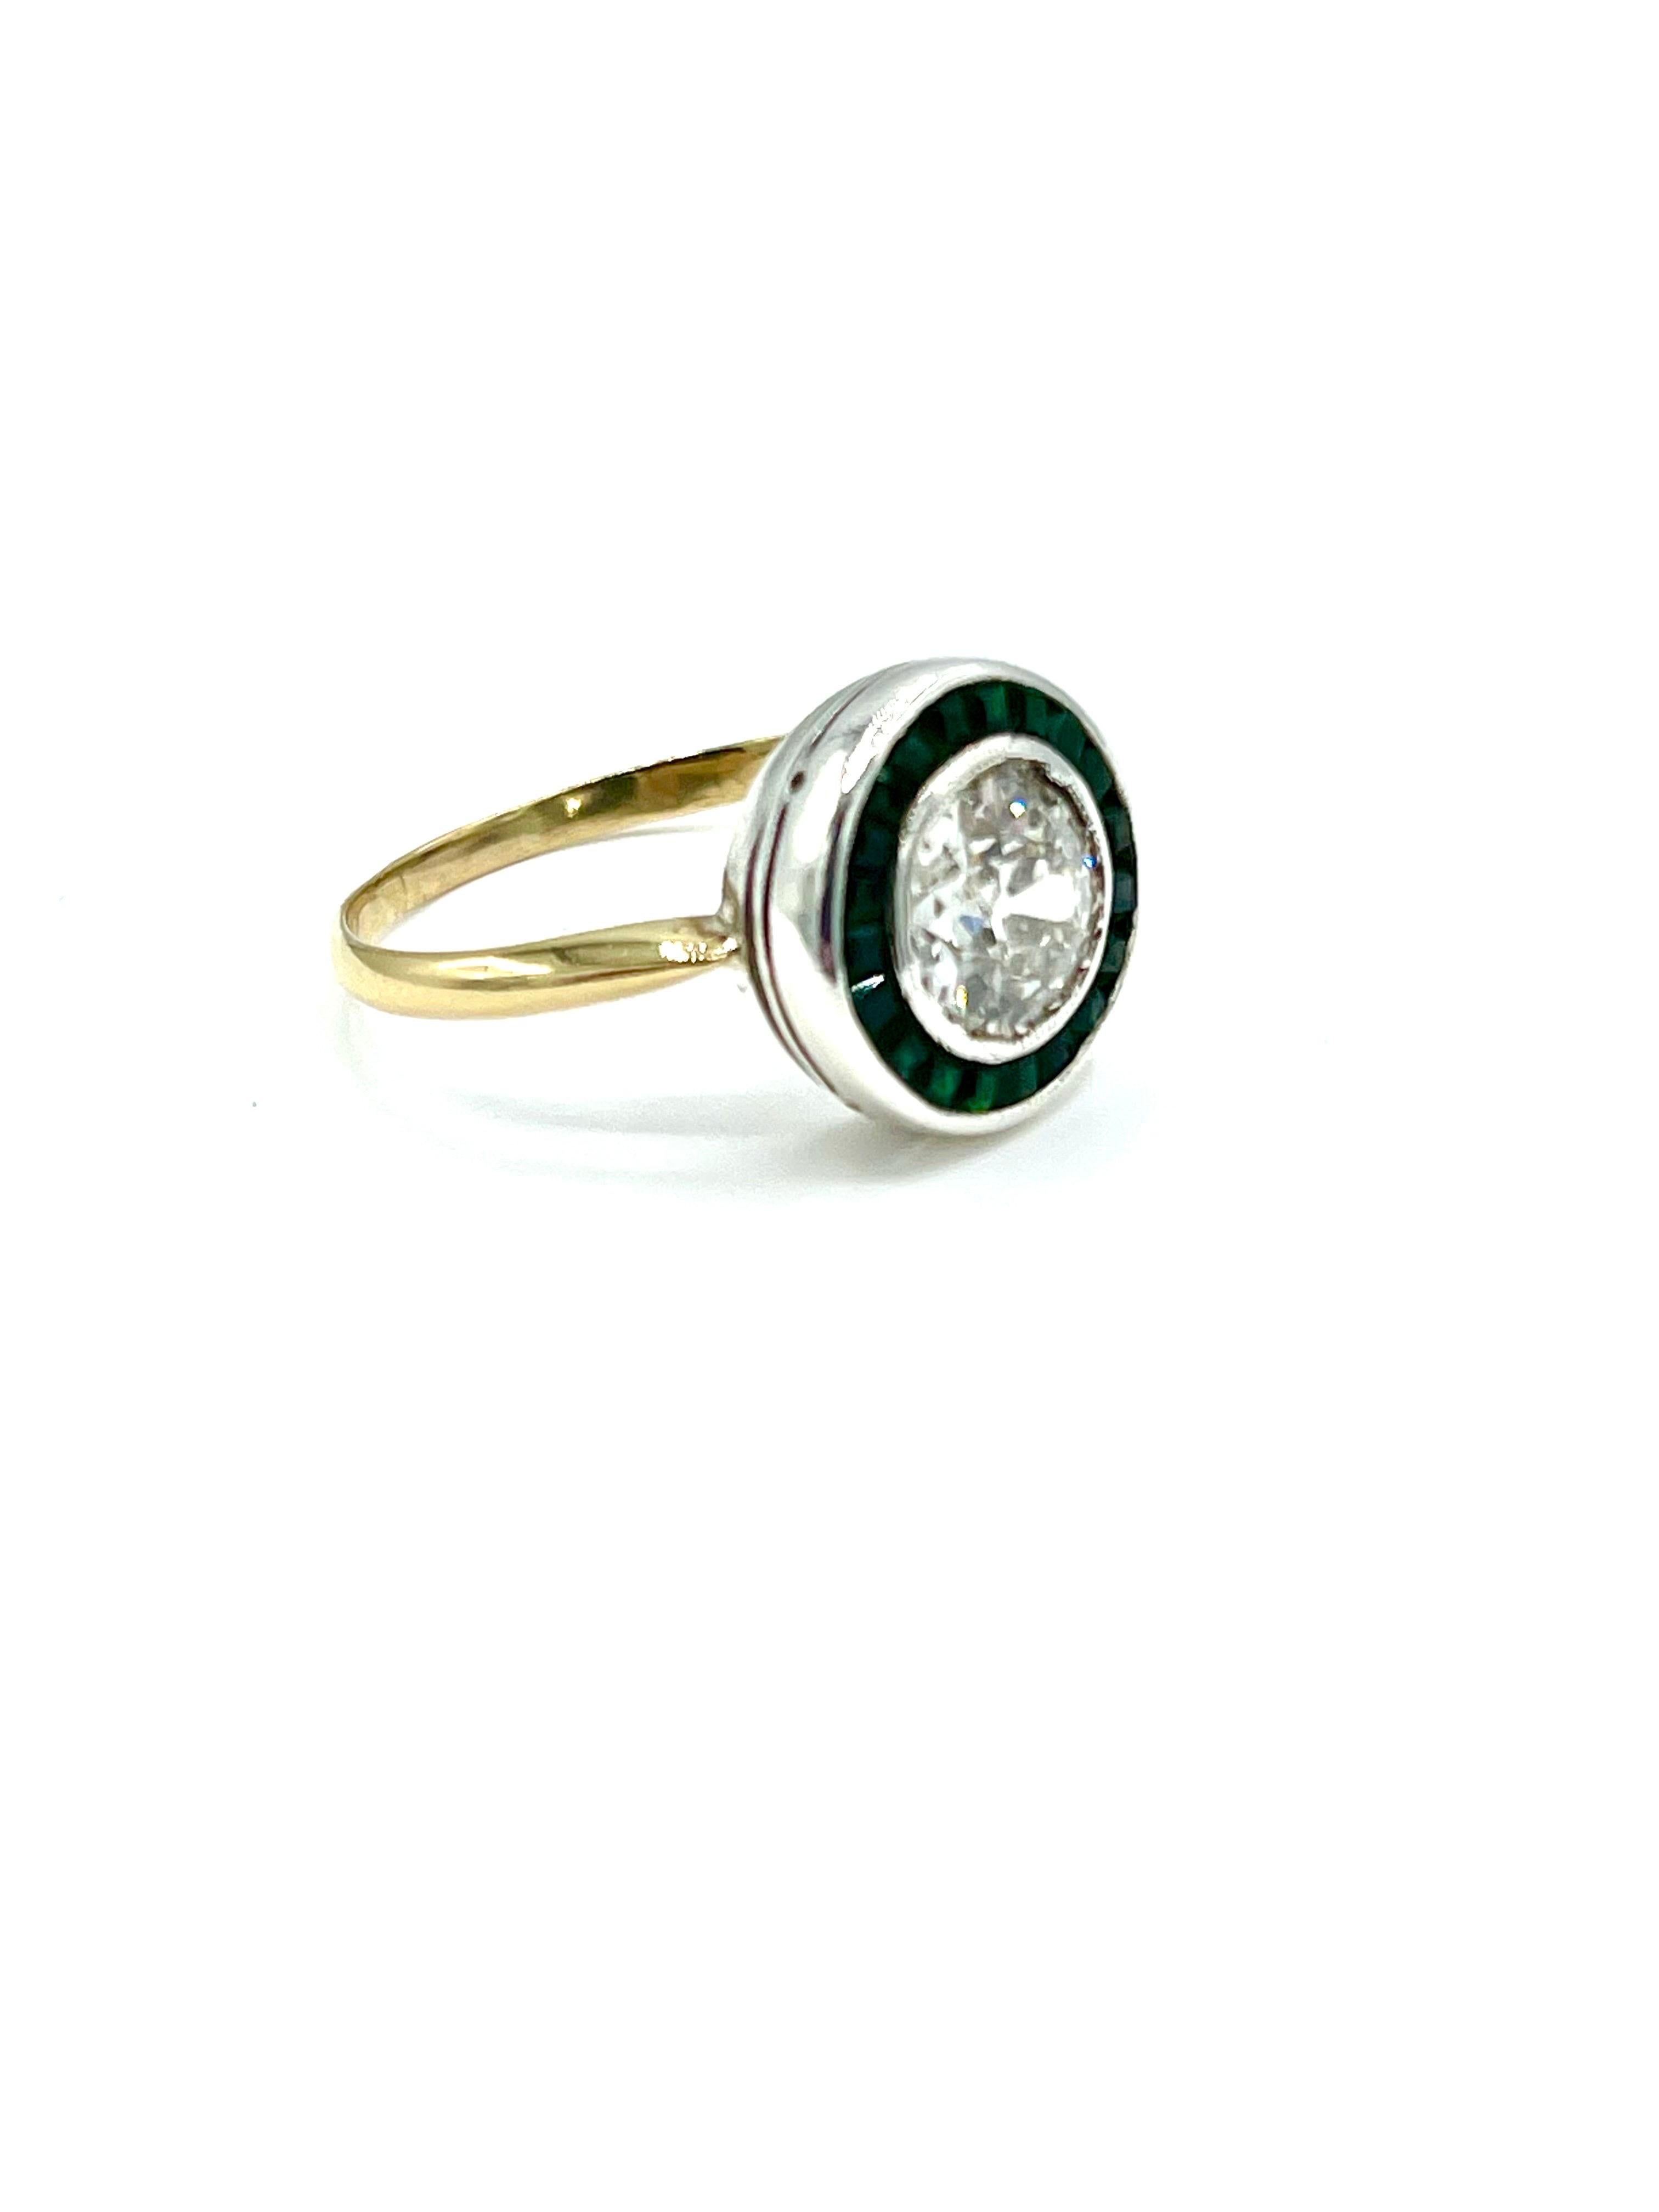 Victorian 1.56 Carat Old European Cut Diamonds and Emerald Platinum and Gold Ring